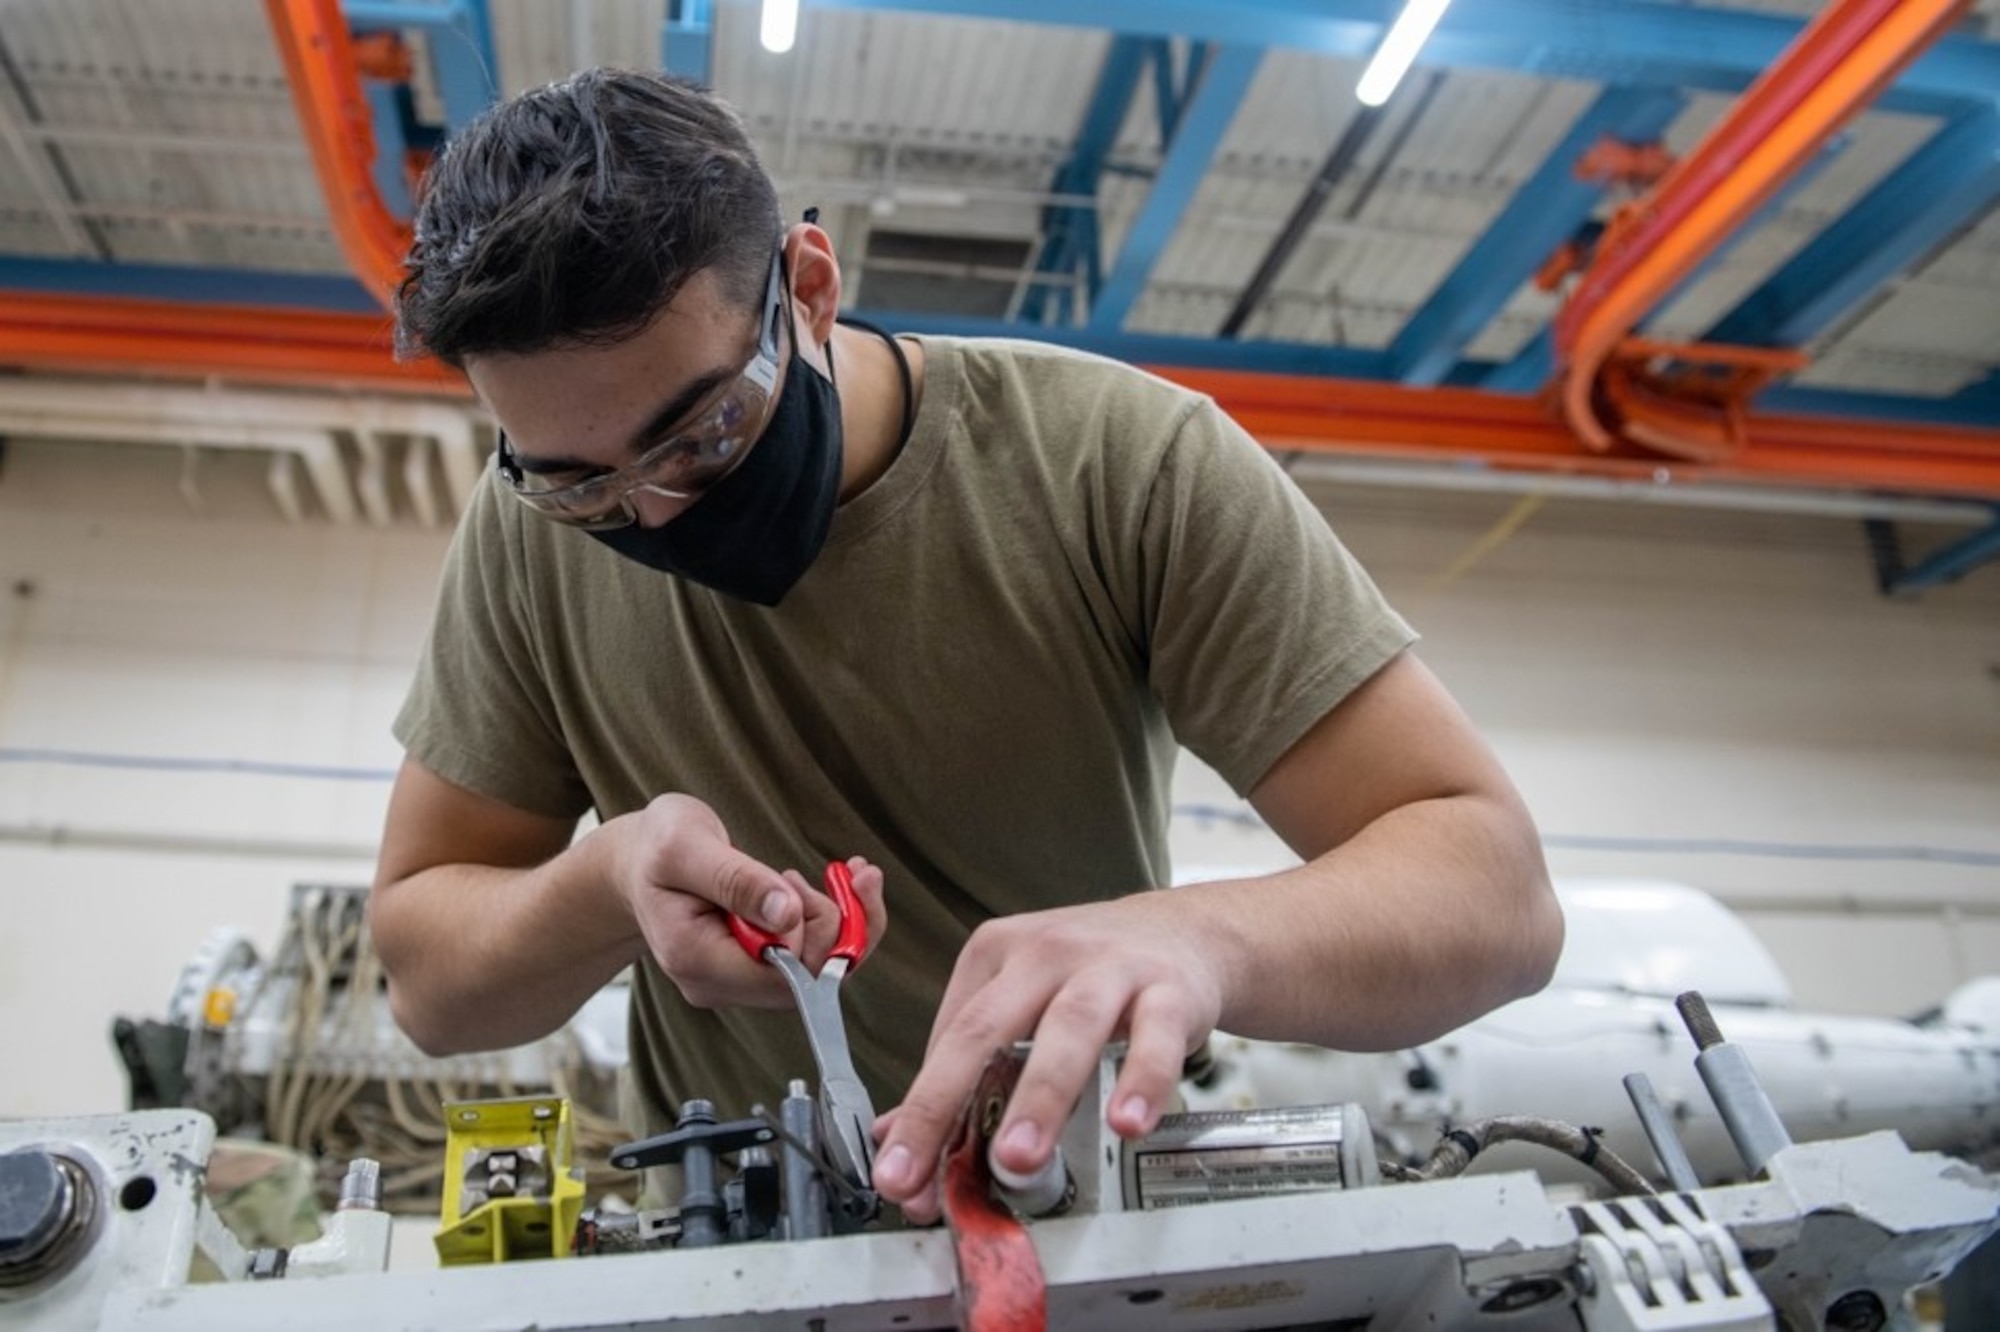 Airman 1st Class Adrian Valle, 28th Munitions Squadron armament systems apprentice, constructs an ejector rack at Ellsworth Air Force Base, S.D., Feb. 4, 2022.